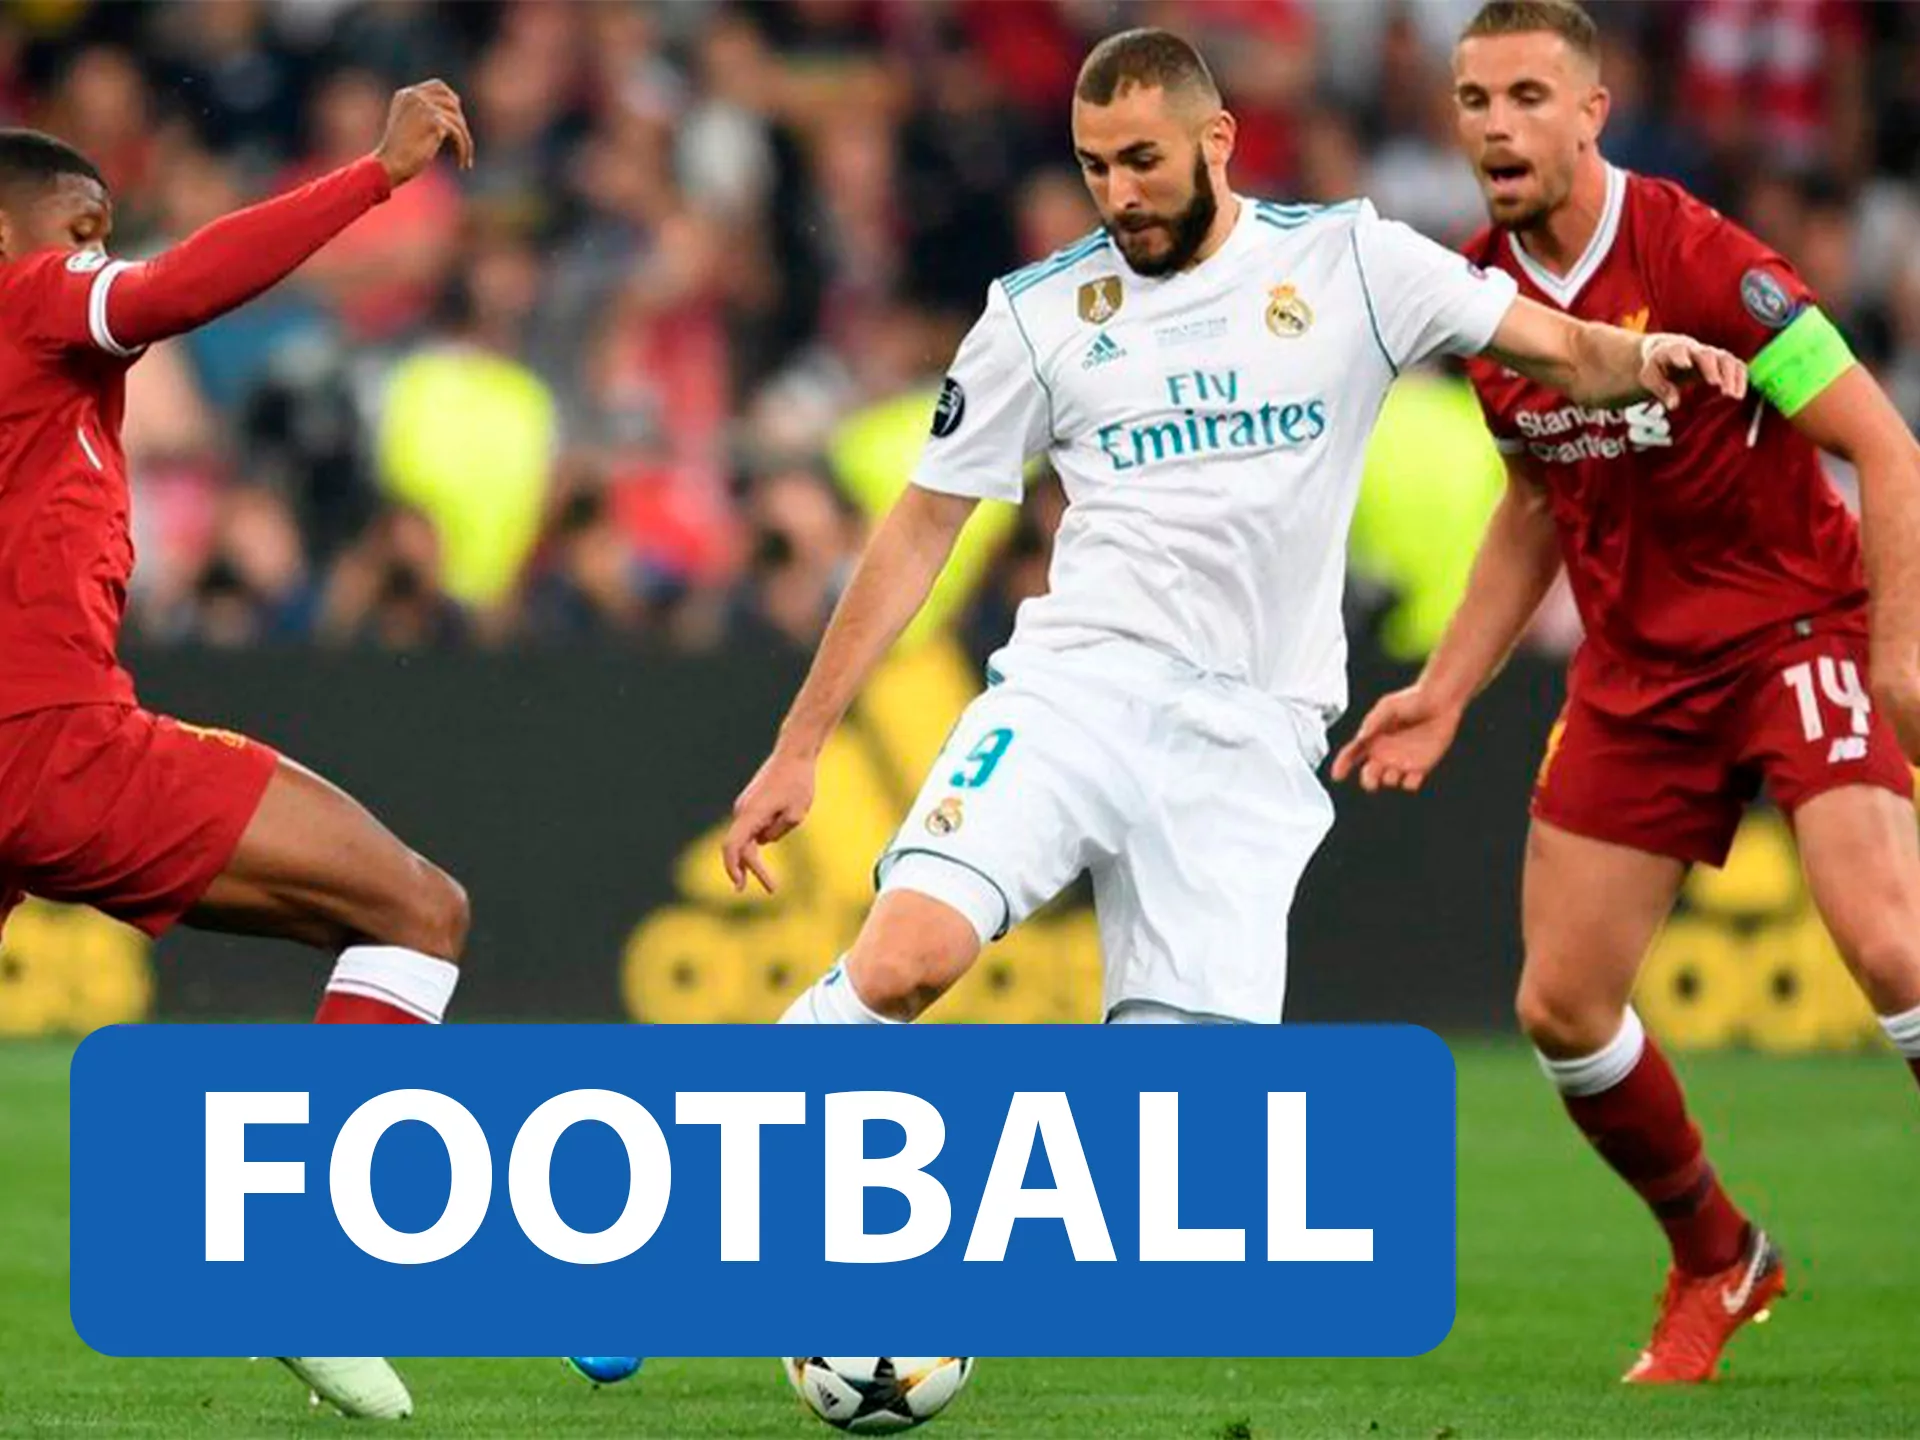 You can find all your favorite football matches to bet on at Betcity.